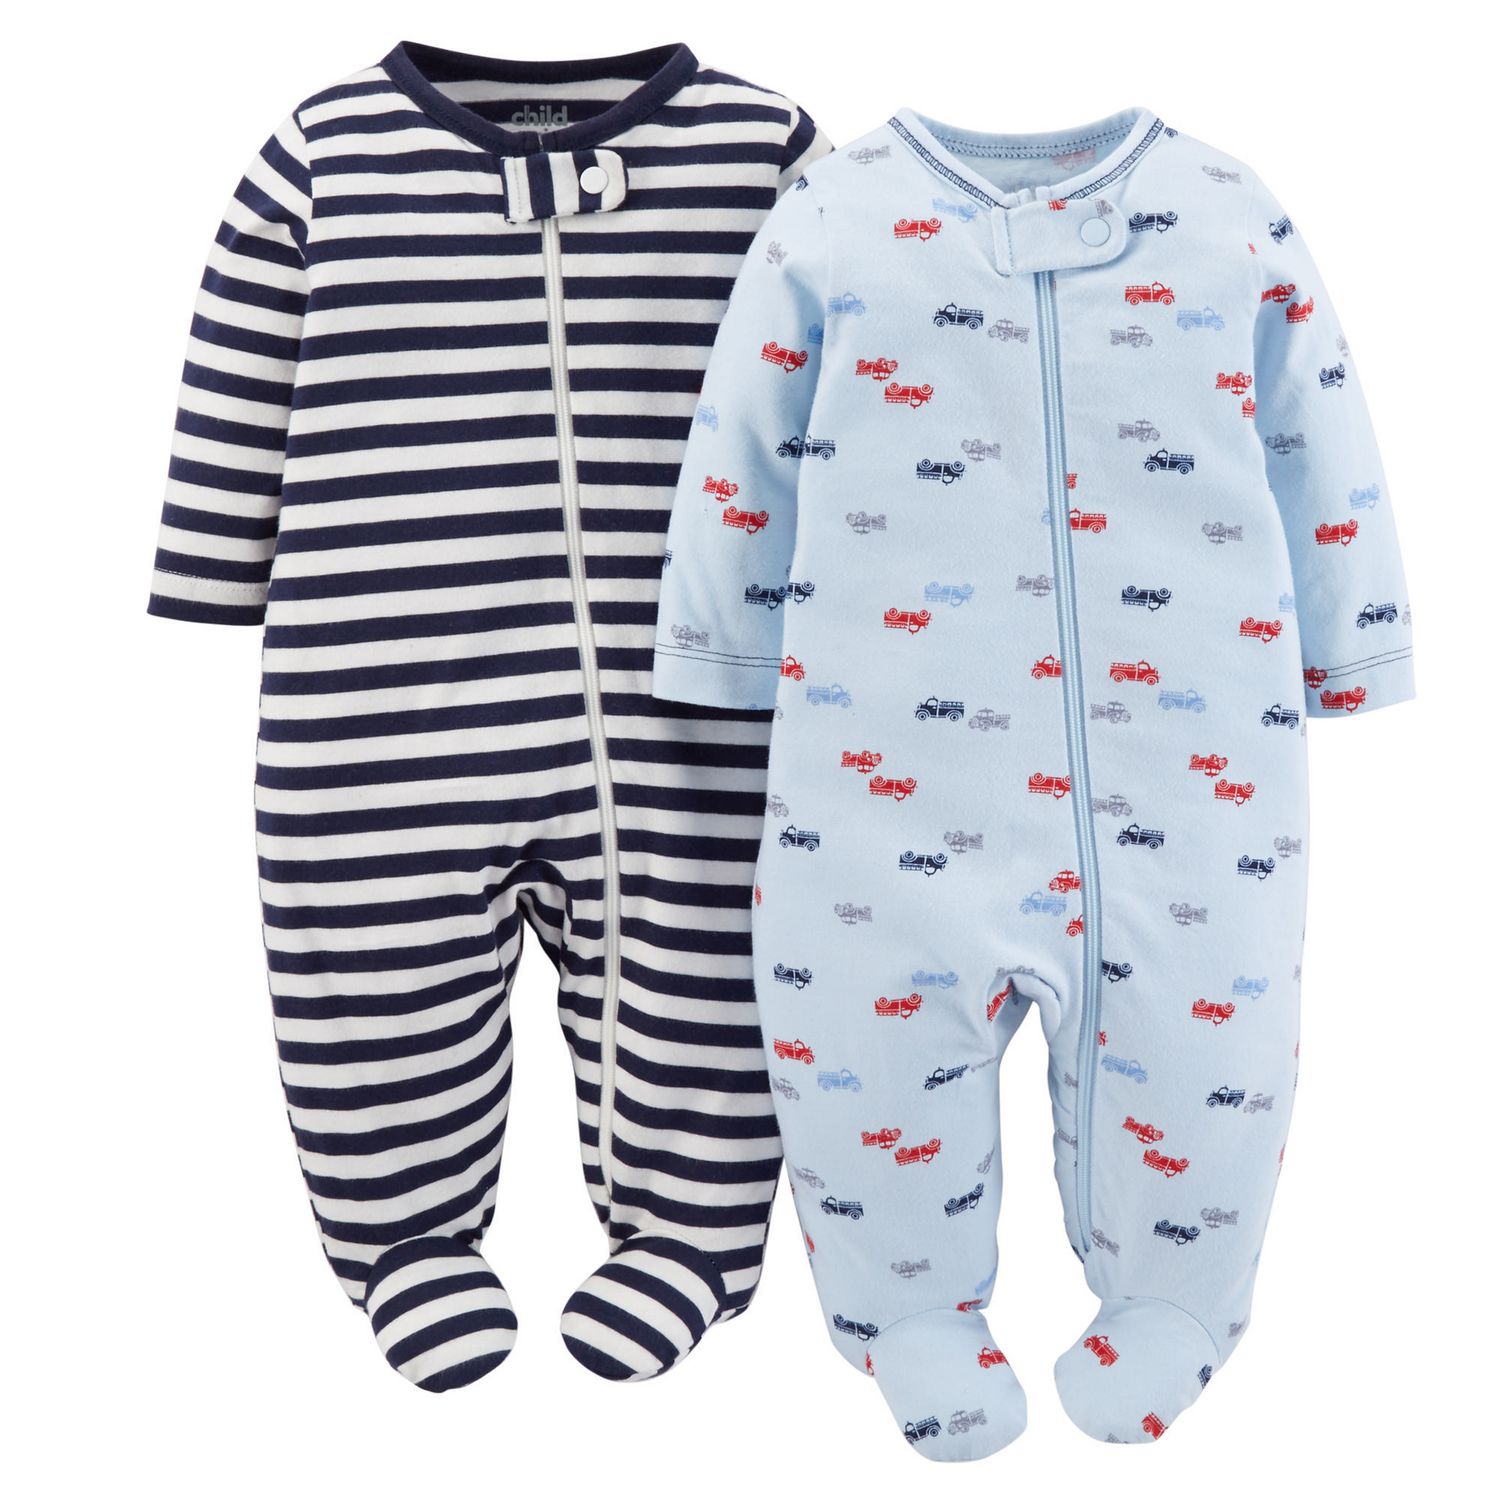 Child of Mine made by Carter's 2-Pack Zip-Up Sleep N Play Pajamas for Boys  | Walmart Canada